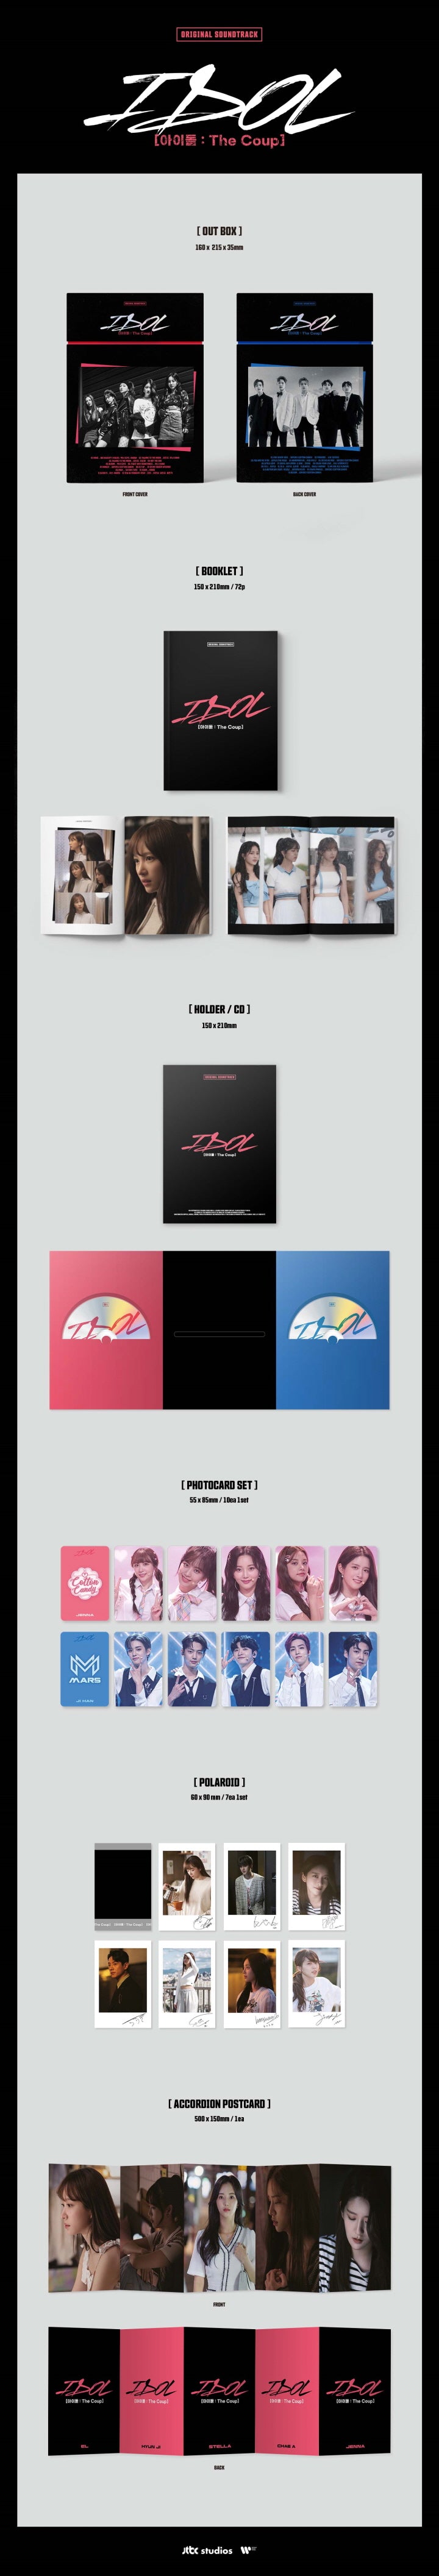 JTBC Monday/Tuesday drama 'IDOL [Idol: The Coup]' OST album release The physical album of JTBC's Monday-Tuesday drama 'IDO...